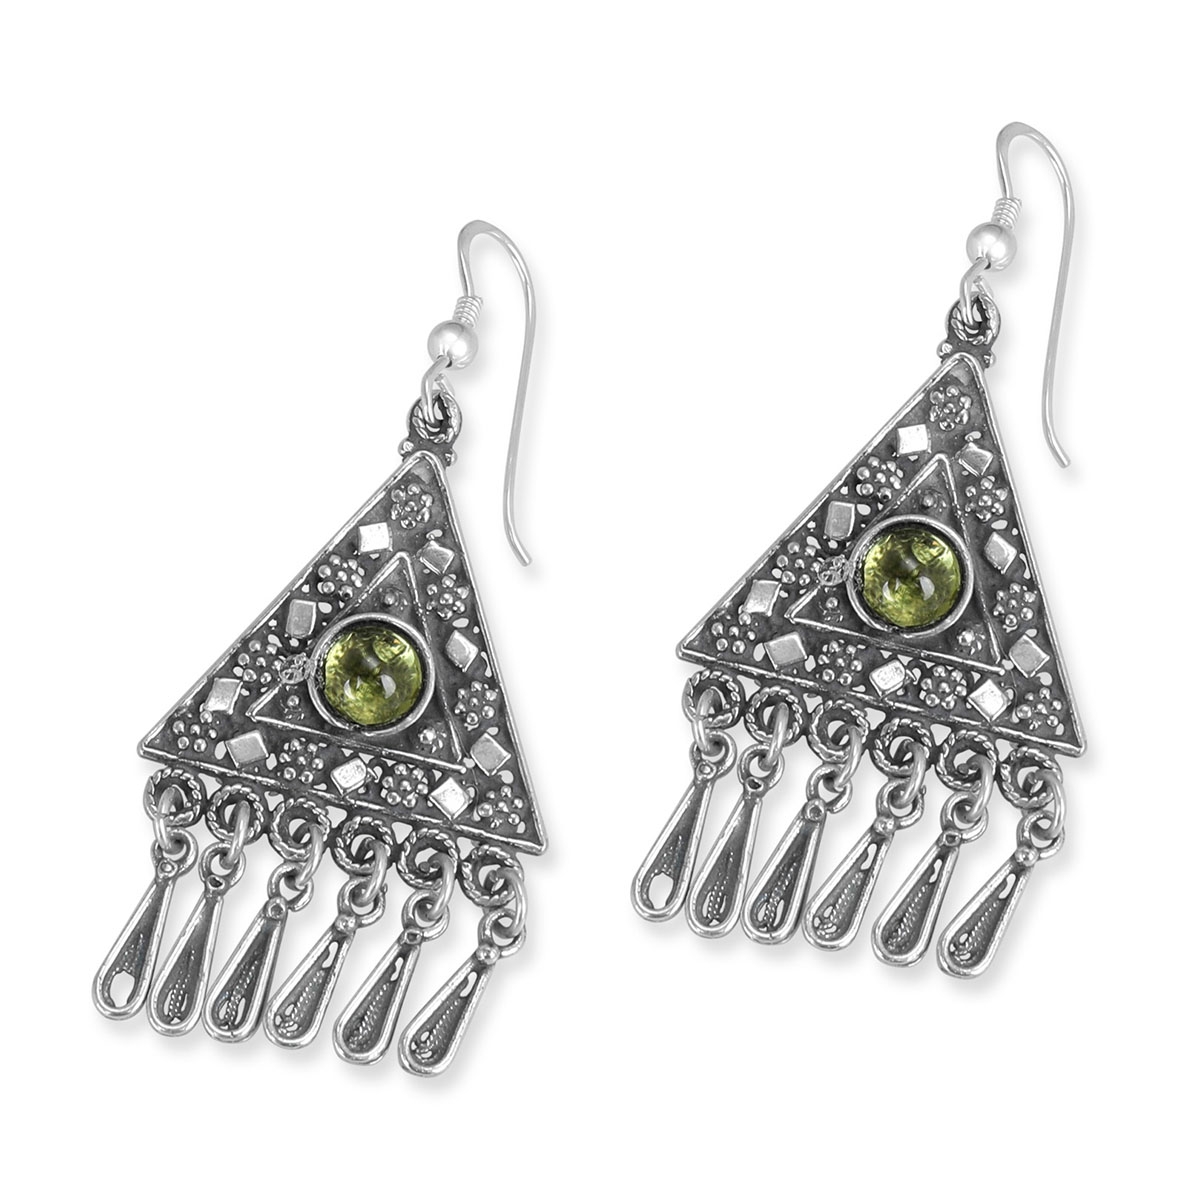 Traditional Yemenite Art Handcrafted Sterling Silver and Peridot Stone Triangle Earrings With Chic Designs - 1